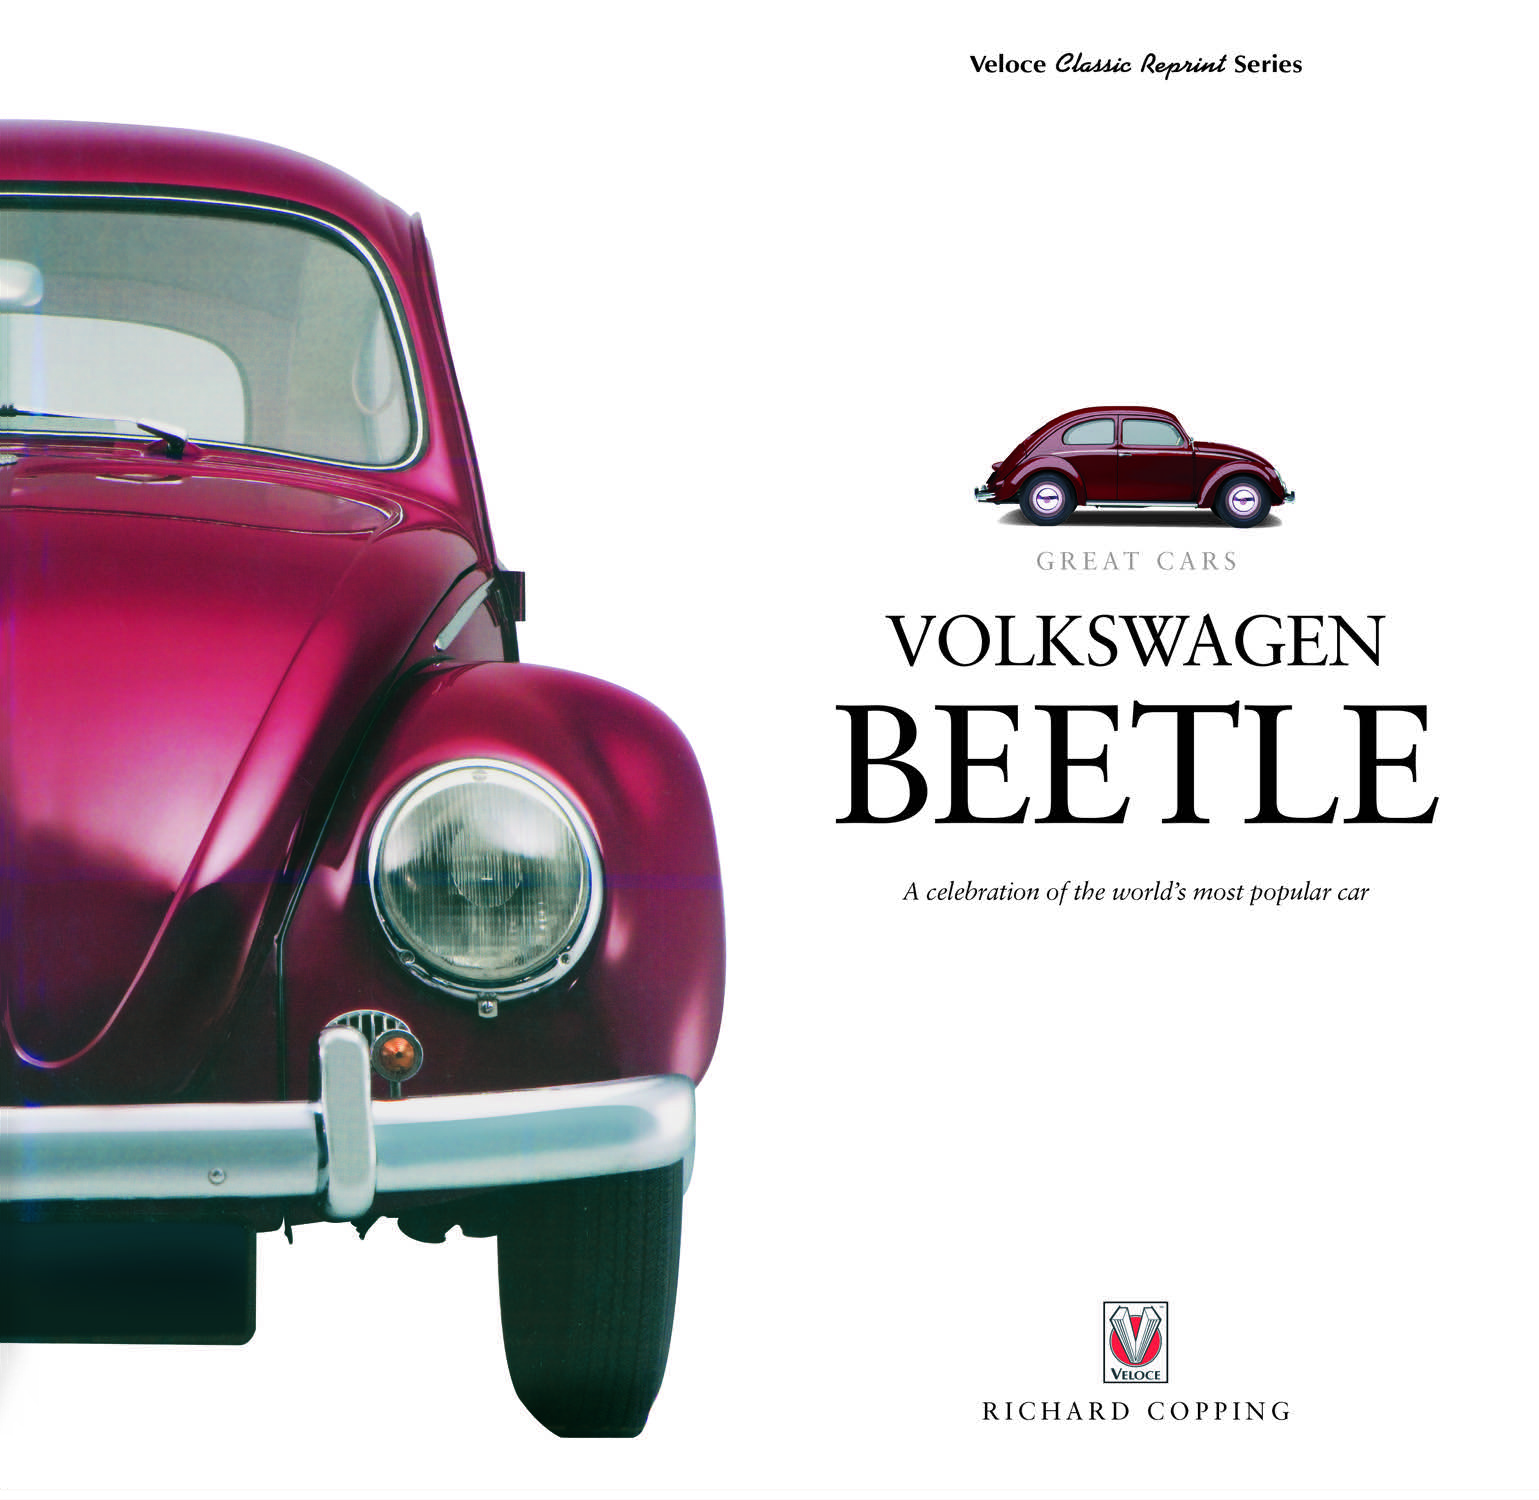 Volkswagen Beetle – A Celebration of the World